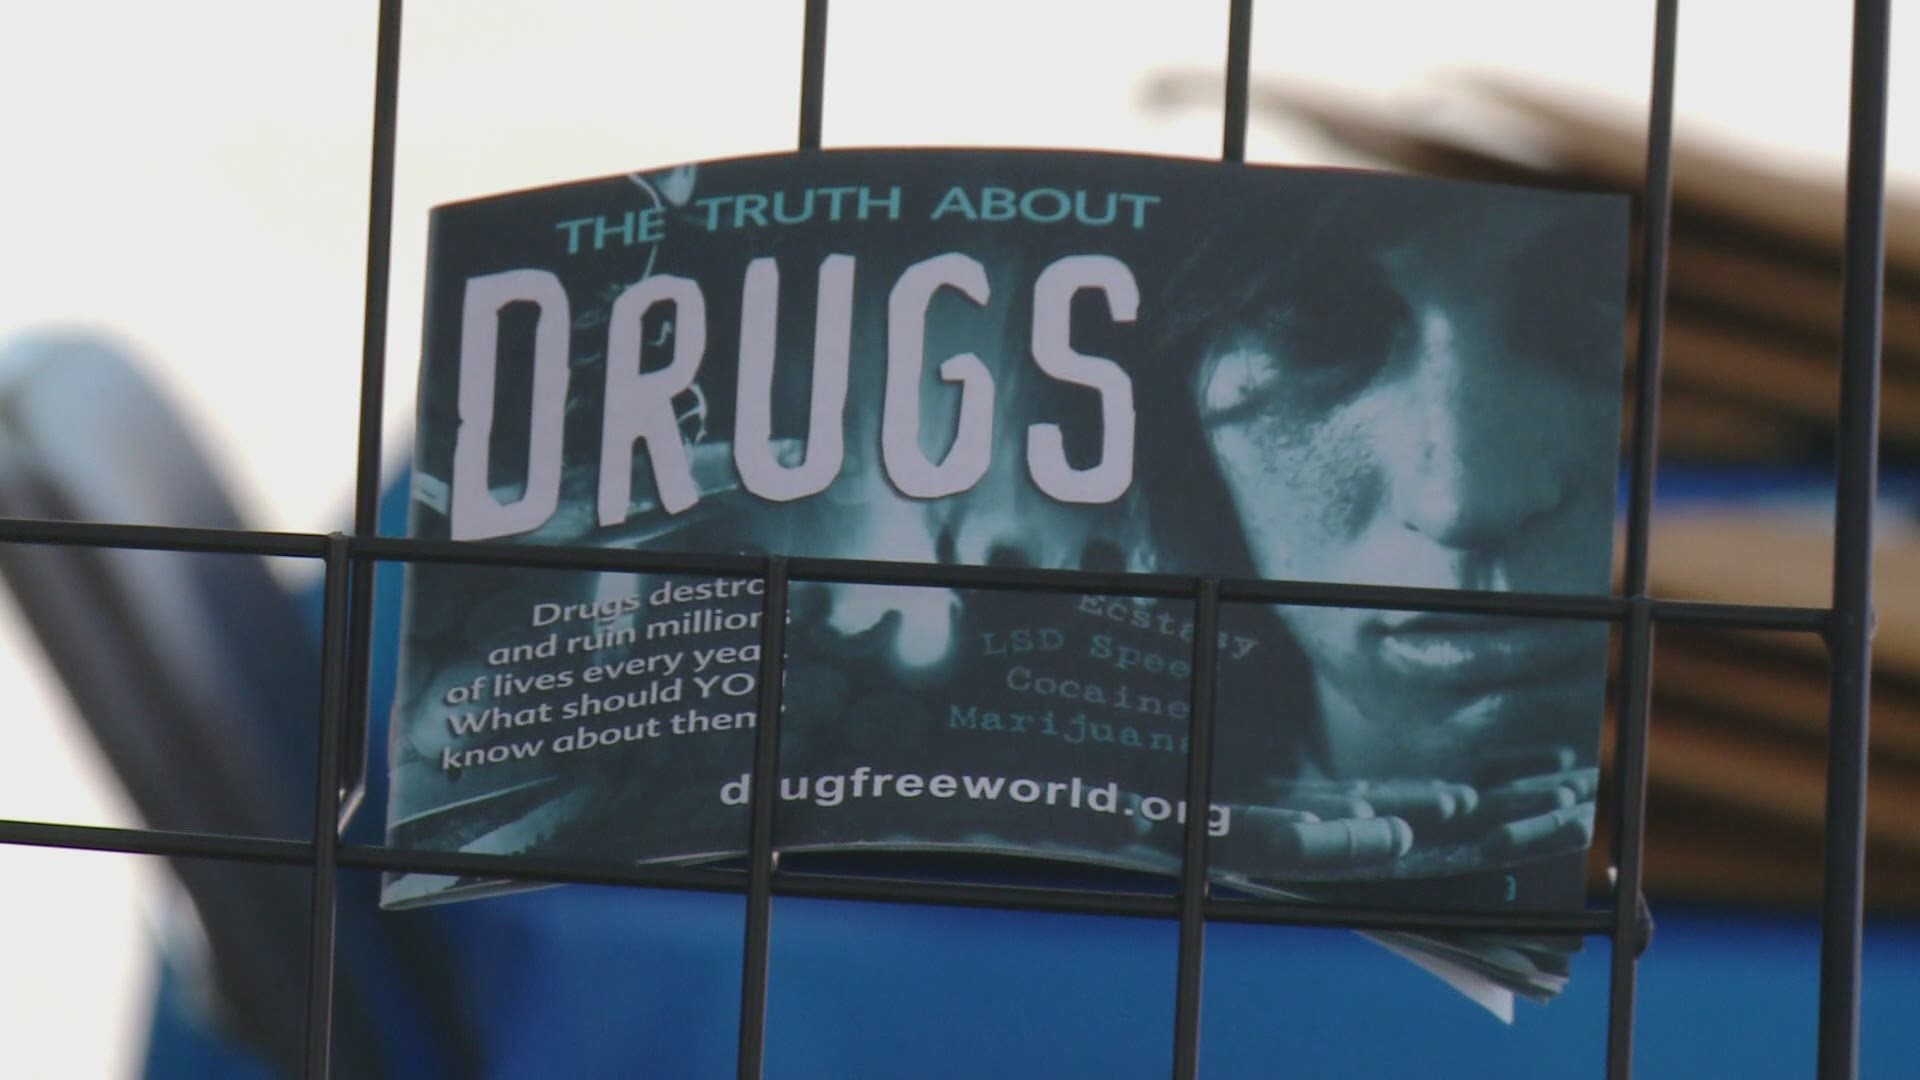 Metro Drug Coalition is using a new event to raise awareness about preventing drug abuse in East Tennessee.